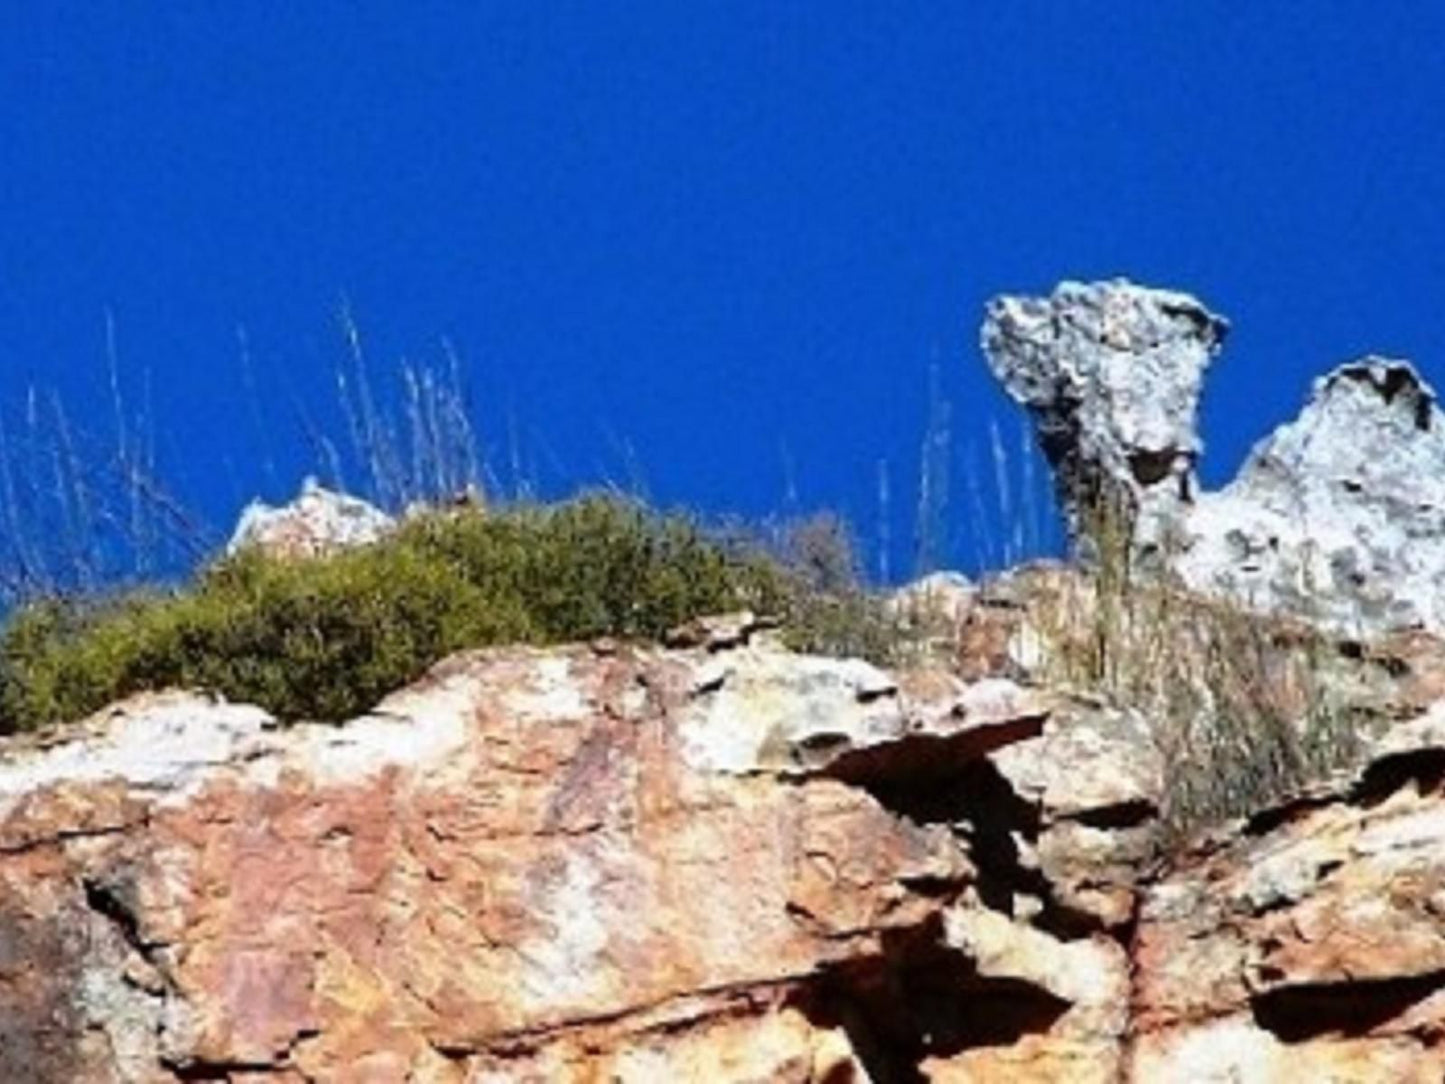 Witteberg Nature Reserve Laingsburg Western Cape South Africa Complementary Colors, Cliff, Nature, Stone Texture, Texture